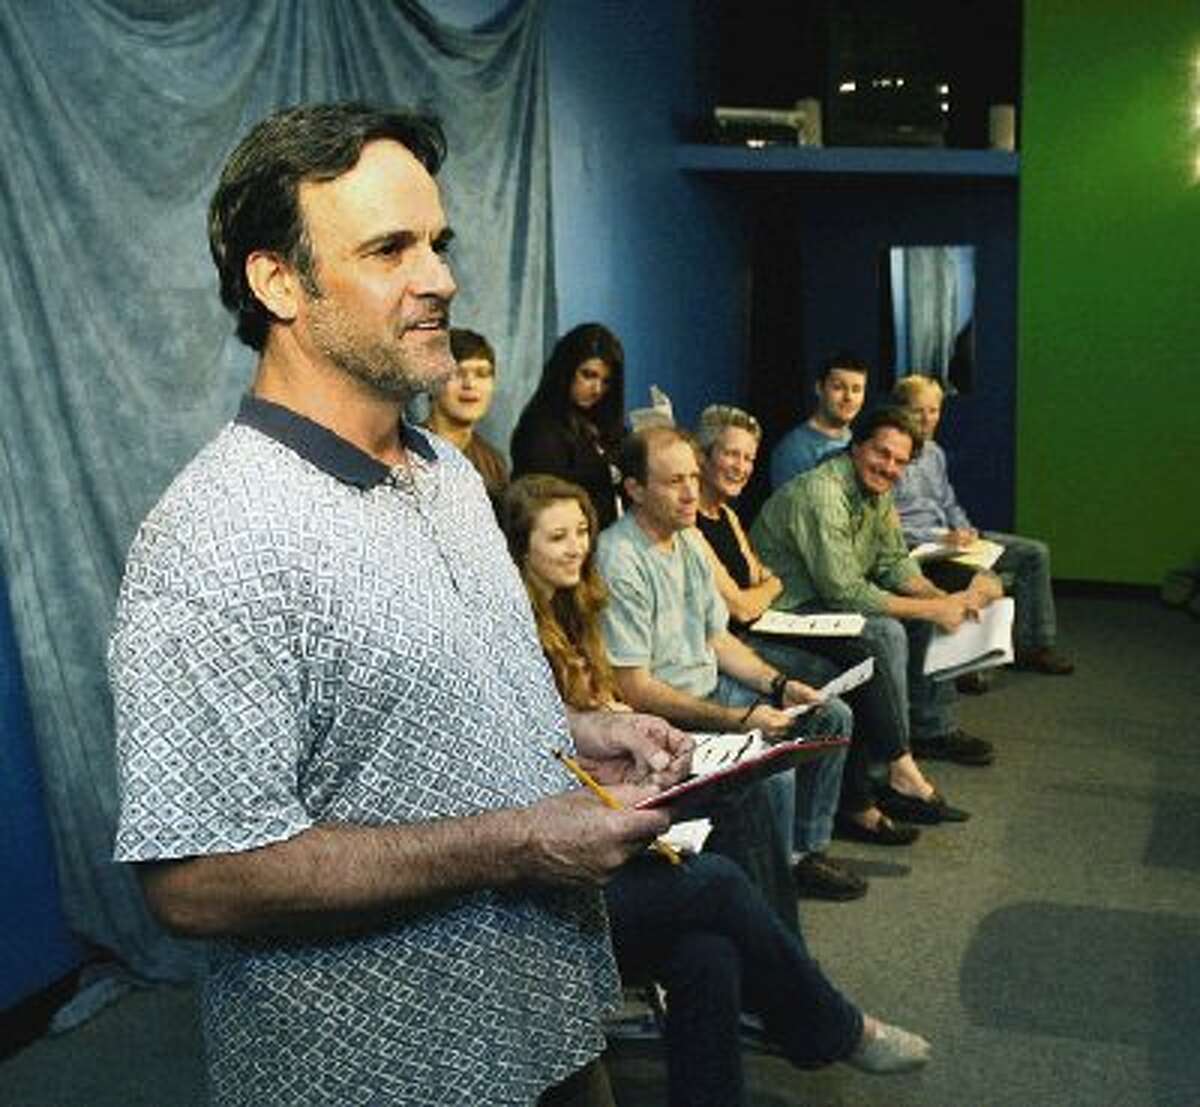 Veteran Hollywood actor Deke Anderson offers weekly acting classes in Houston and The Woodlands to aspiring actors and those seeking to improve their communication skills.